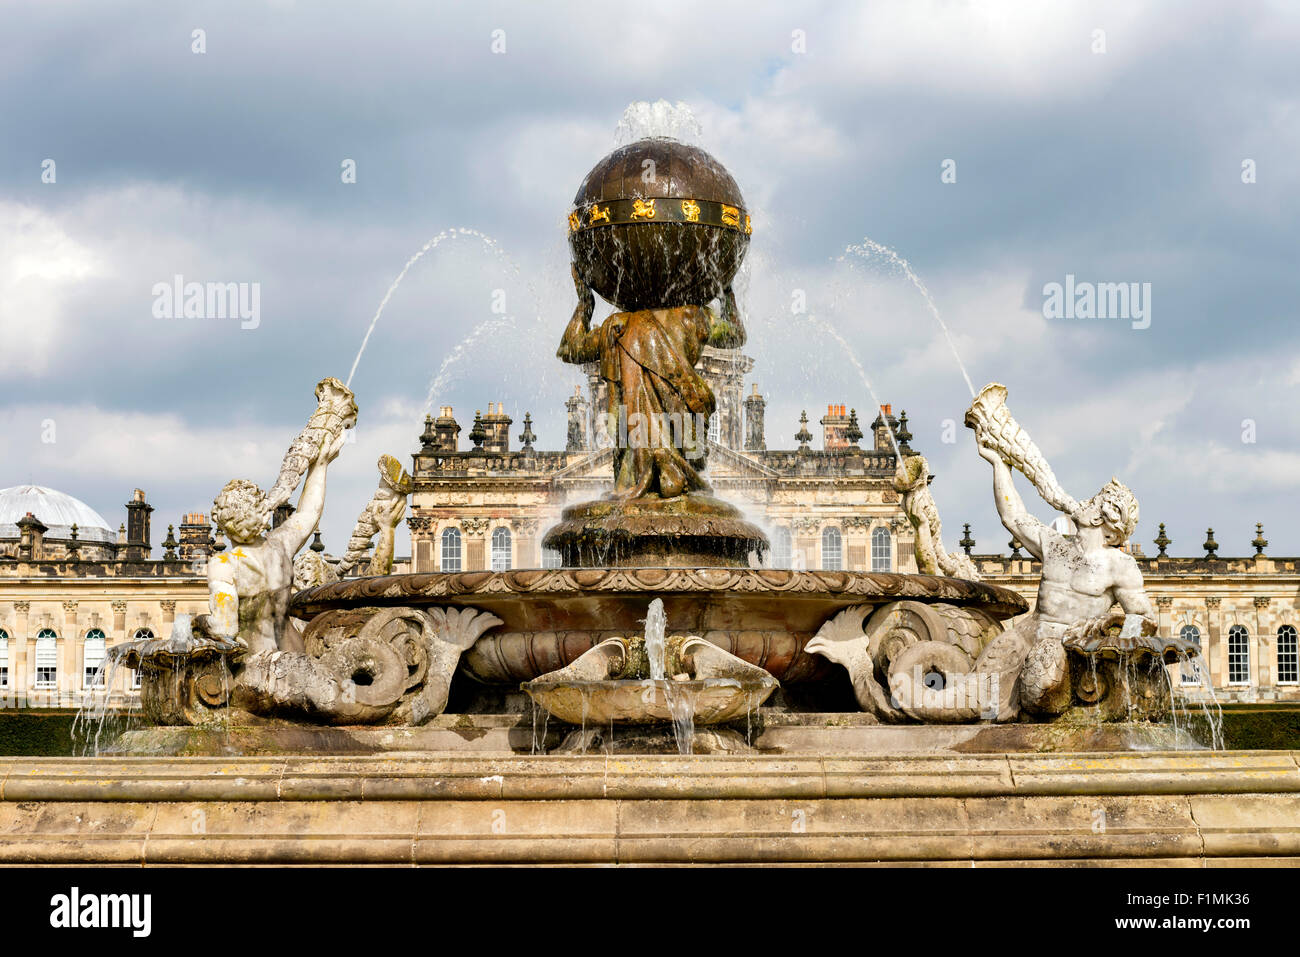 The Atlas fountain at Castle Howard, North Yorkshire Stock Photo